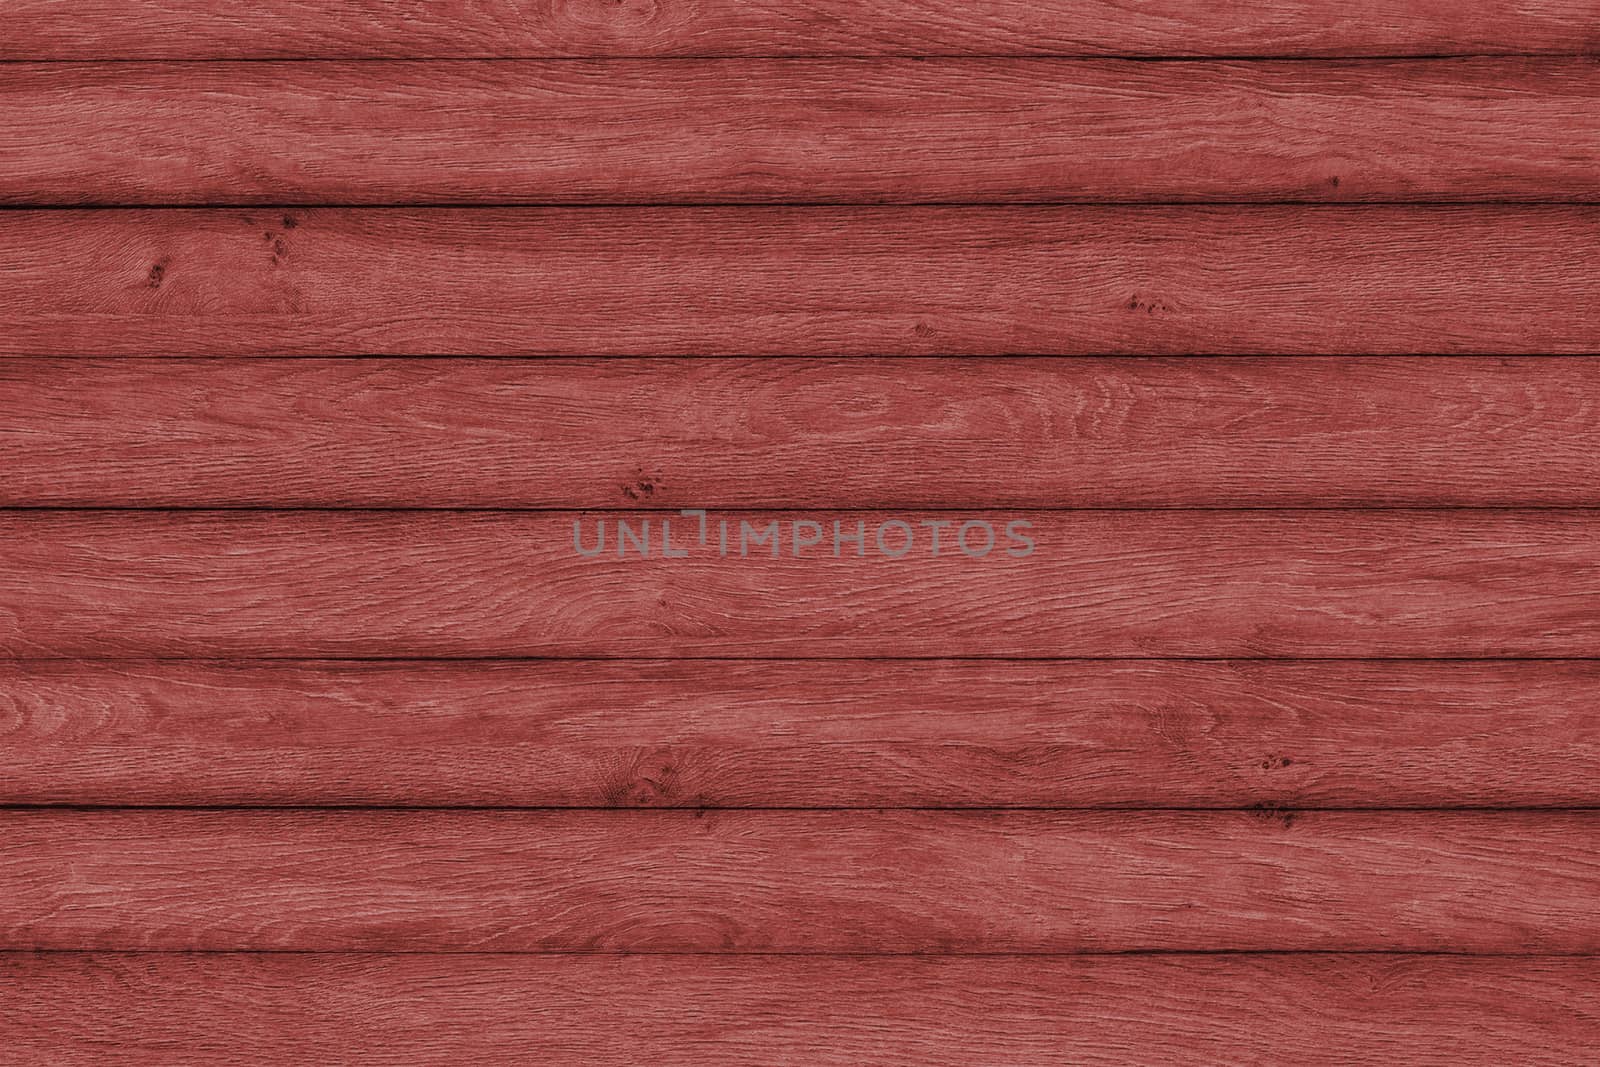 grunge wood panels by ivo_13